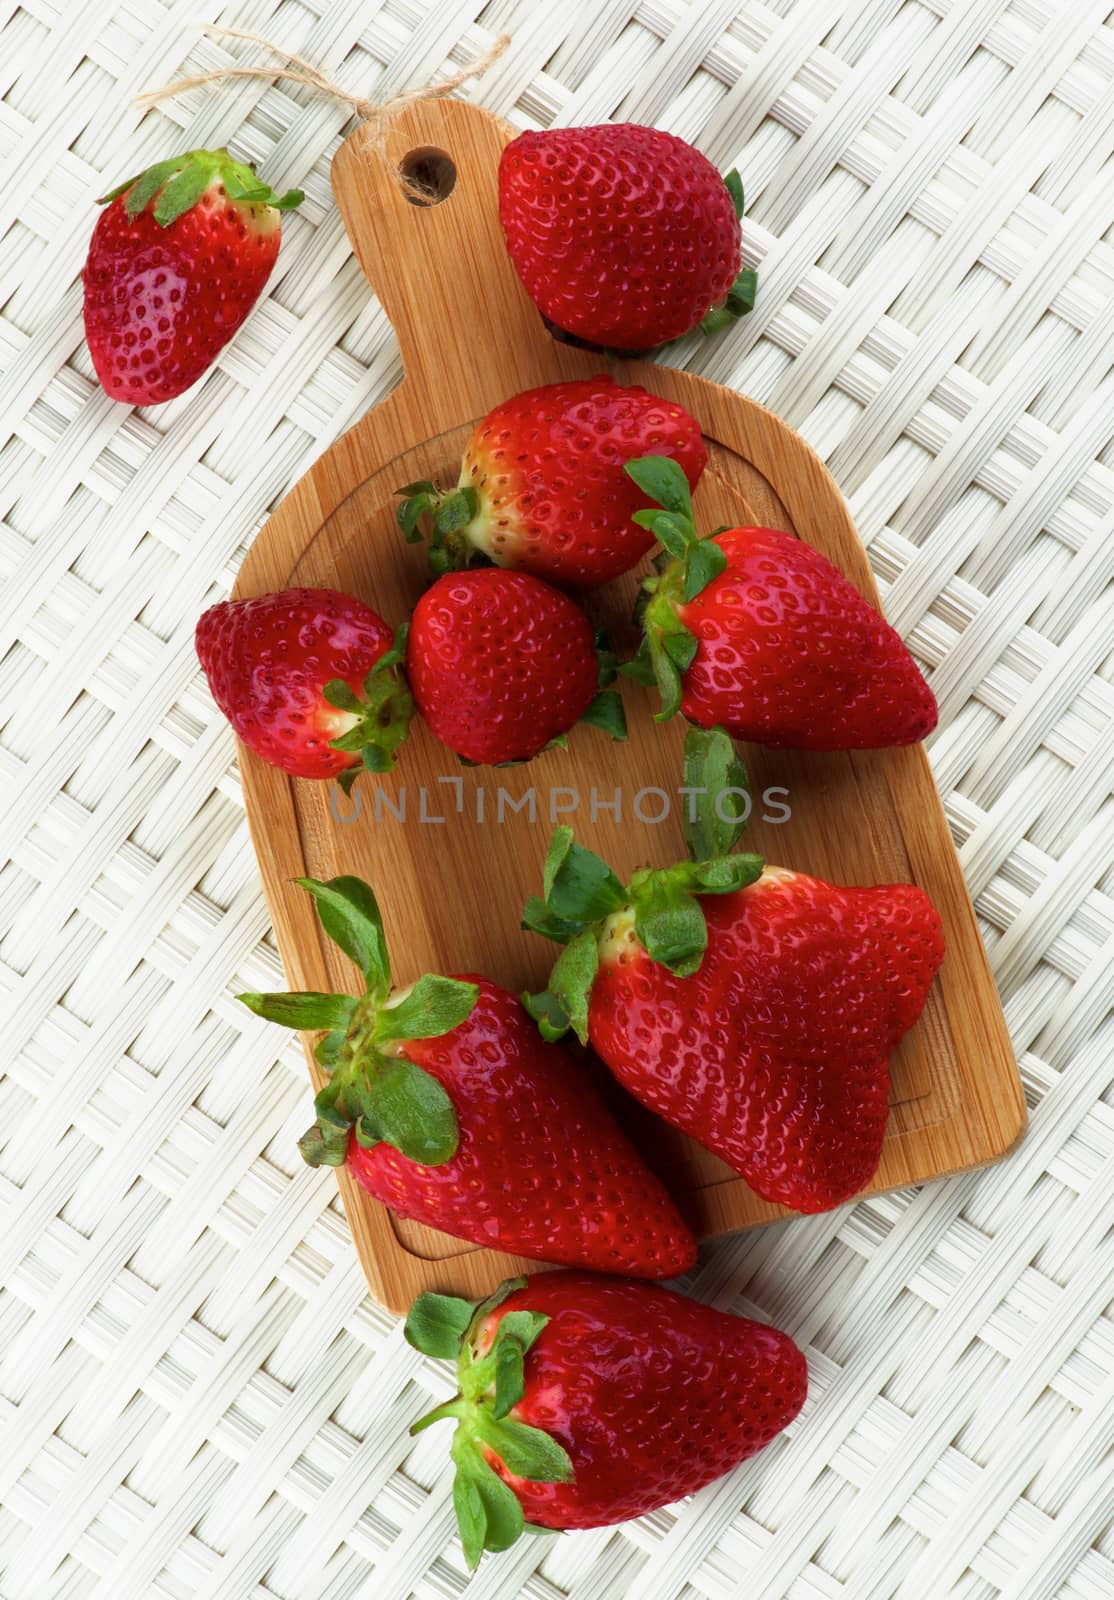 Arrangement of Fresh Ripe Strawberries on Small Wooden Cutting Board closeup on Wicker background. Top View